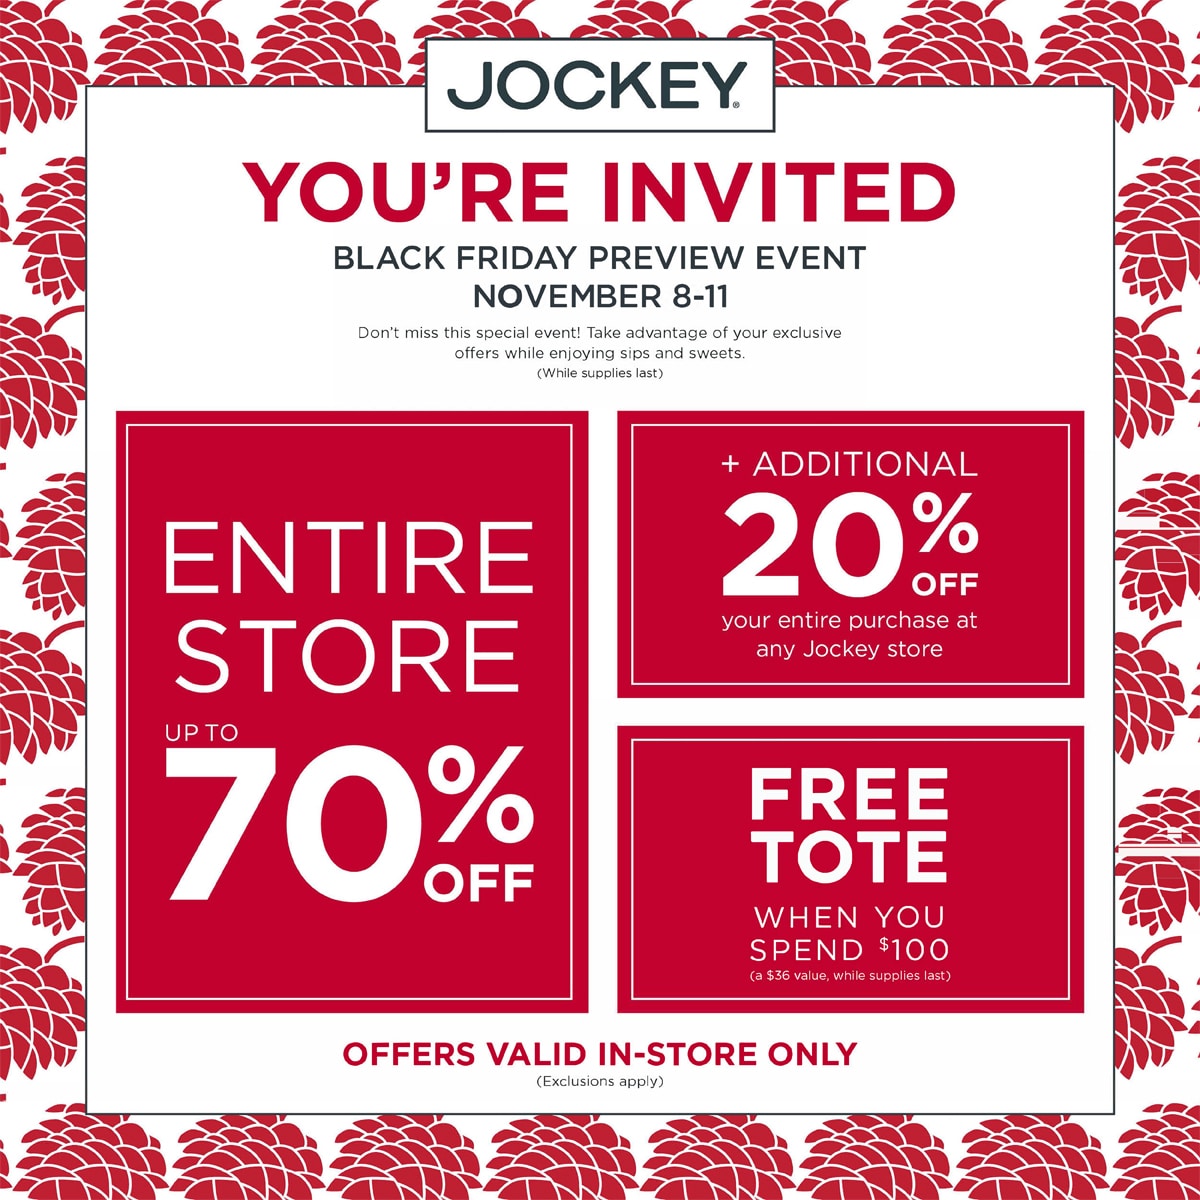 Black Friday Preview Event - Legends Outlets Kansas City - Outlet Mall